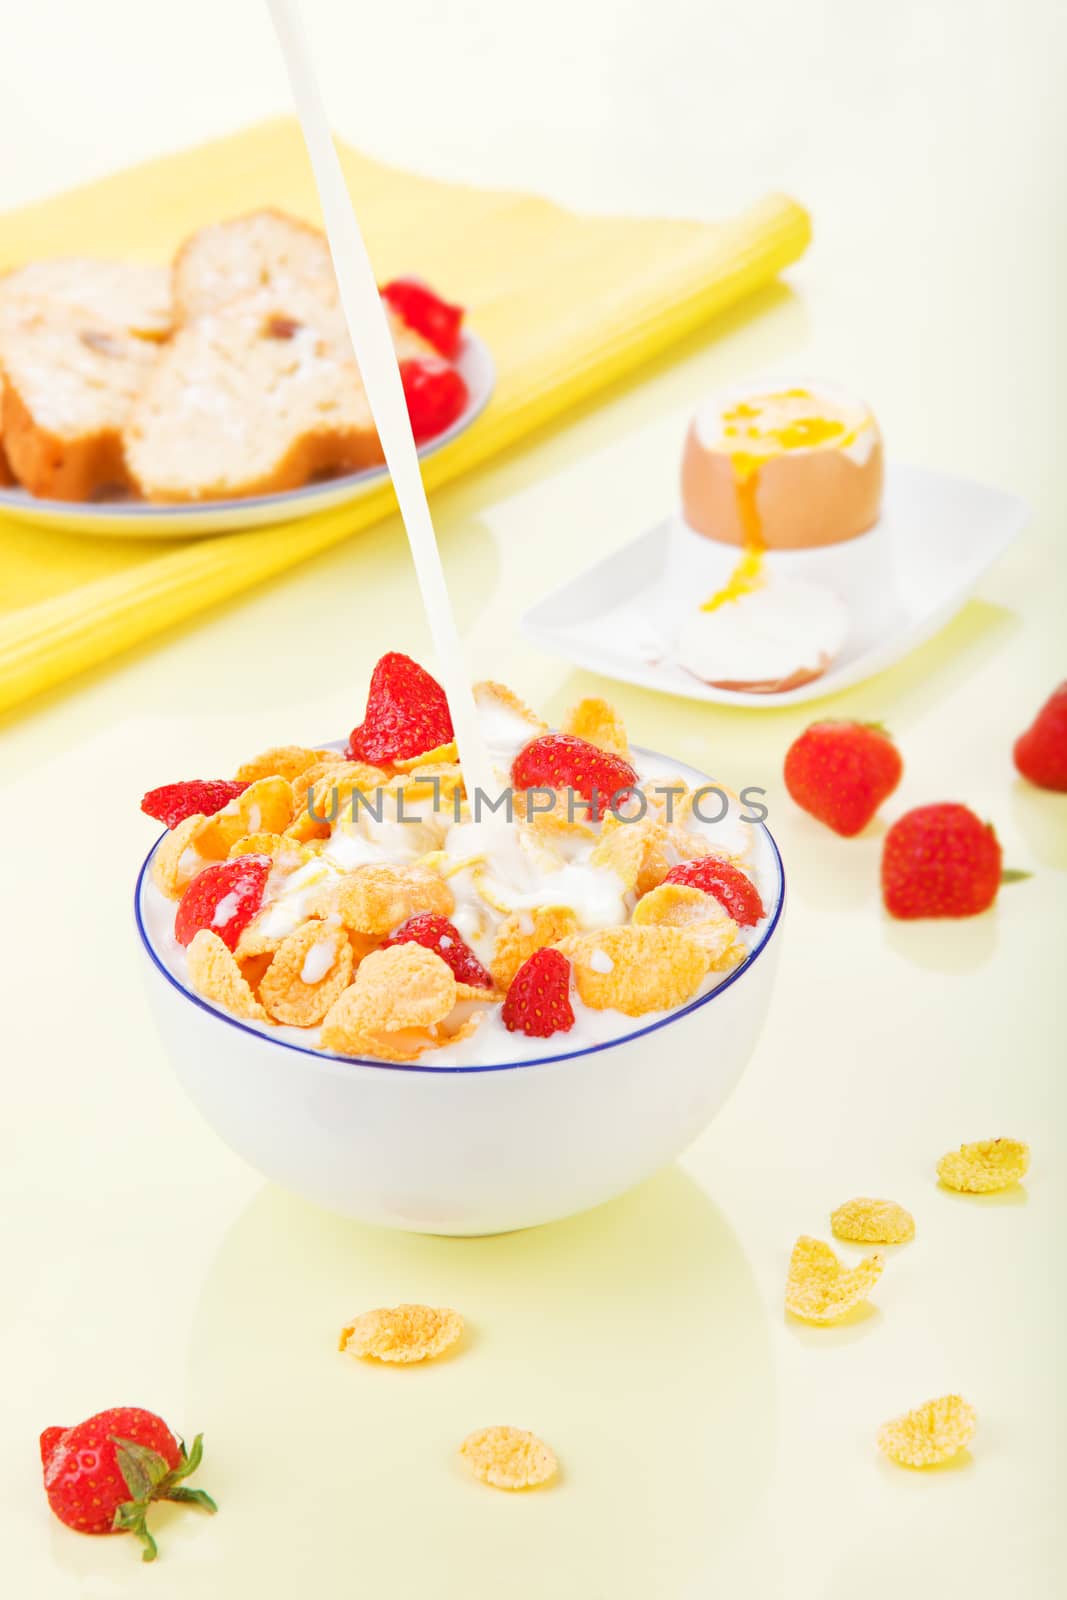 Corn flakes with milk and strawberries. by eskymaks